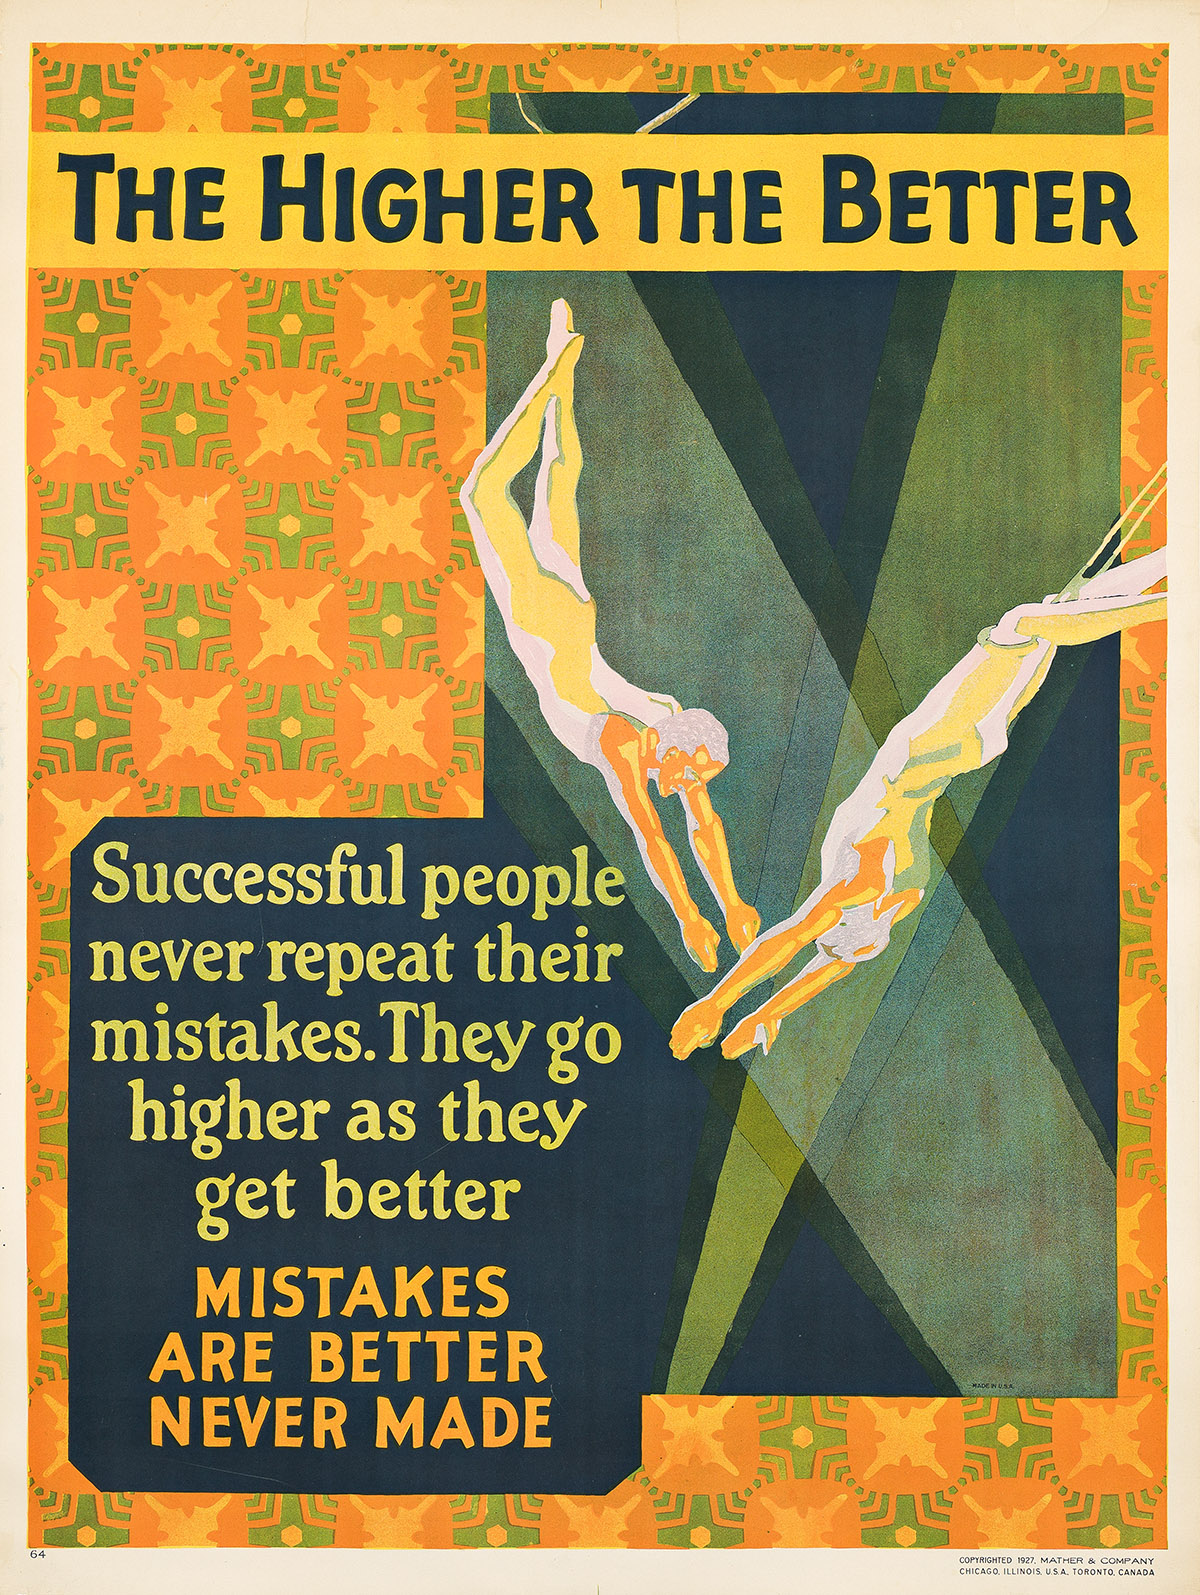 DESIGNER UNKNOWN. THE HIGHER THE BETTER / MISTAKES ARE BETTER NEVER MADE. 1927. 47¼x35½ inches, 120x90¼ cm. Mather & Company, Chicago.